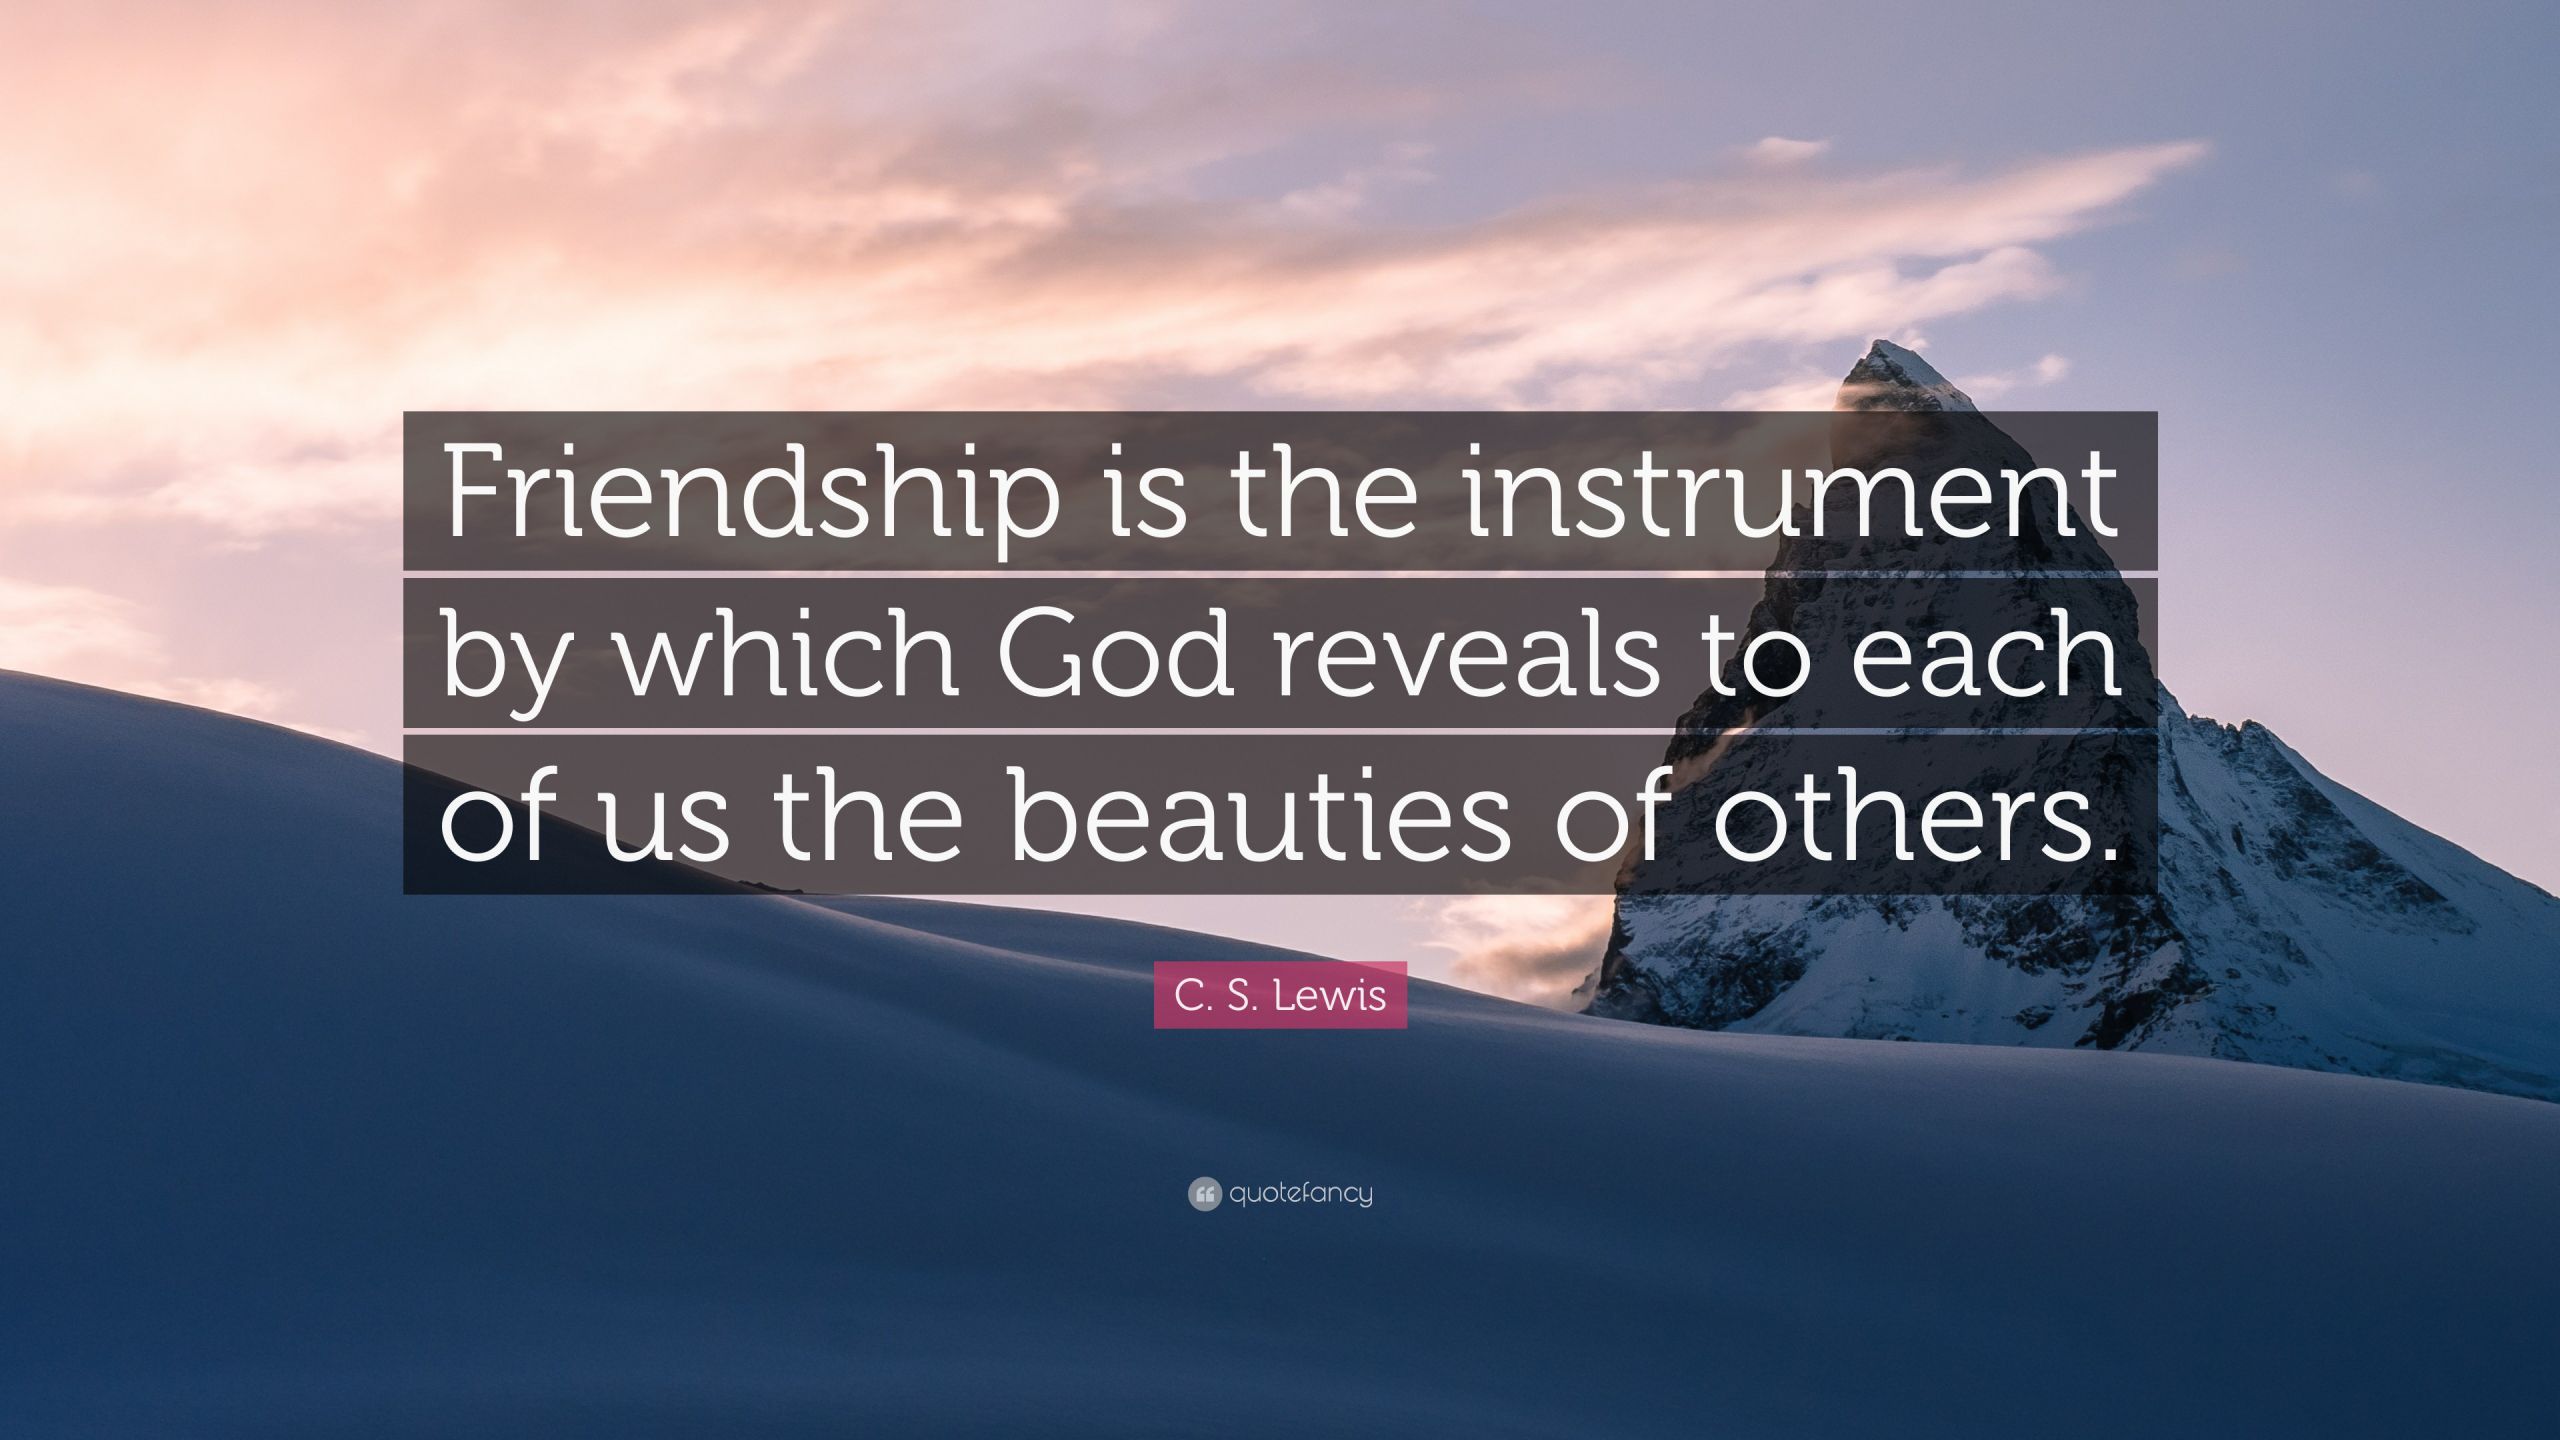 C.S Lewis Quotes On Friendship
 C S Lewis Quote “Friendship is the instrument by which